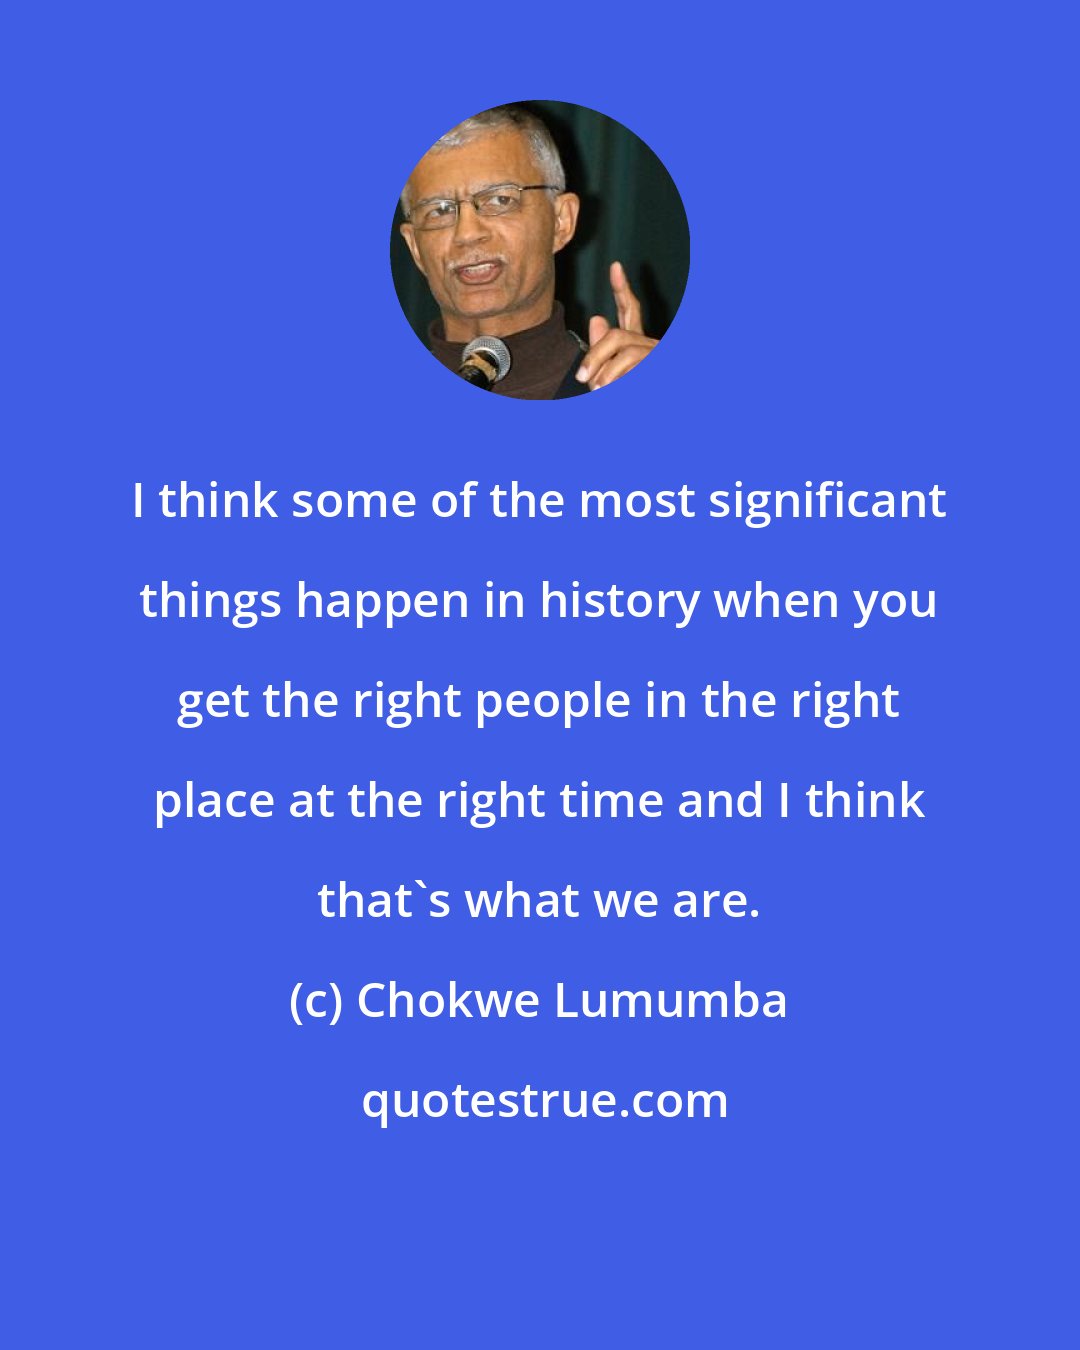 Chokwe Lumumba: I think some of the most significant things happen in history when you get the right people in the right place at the right time and I think that's what we are.